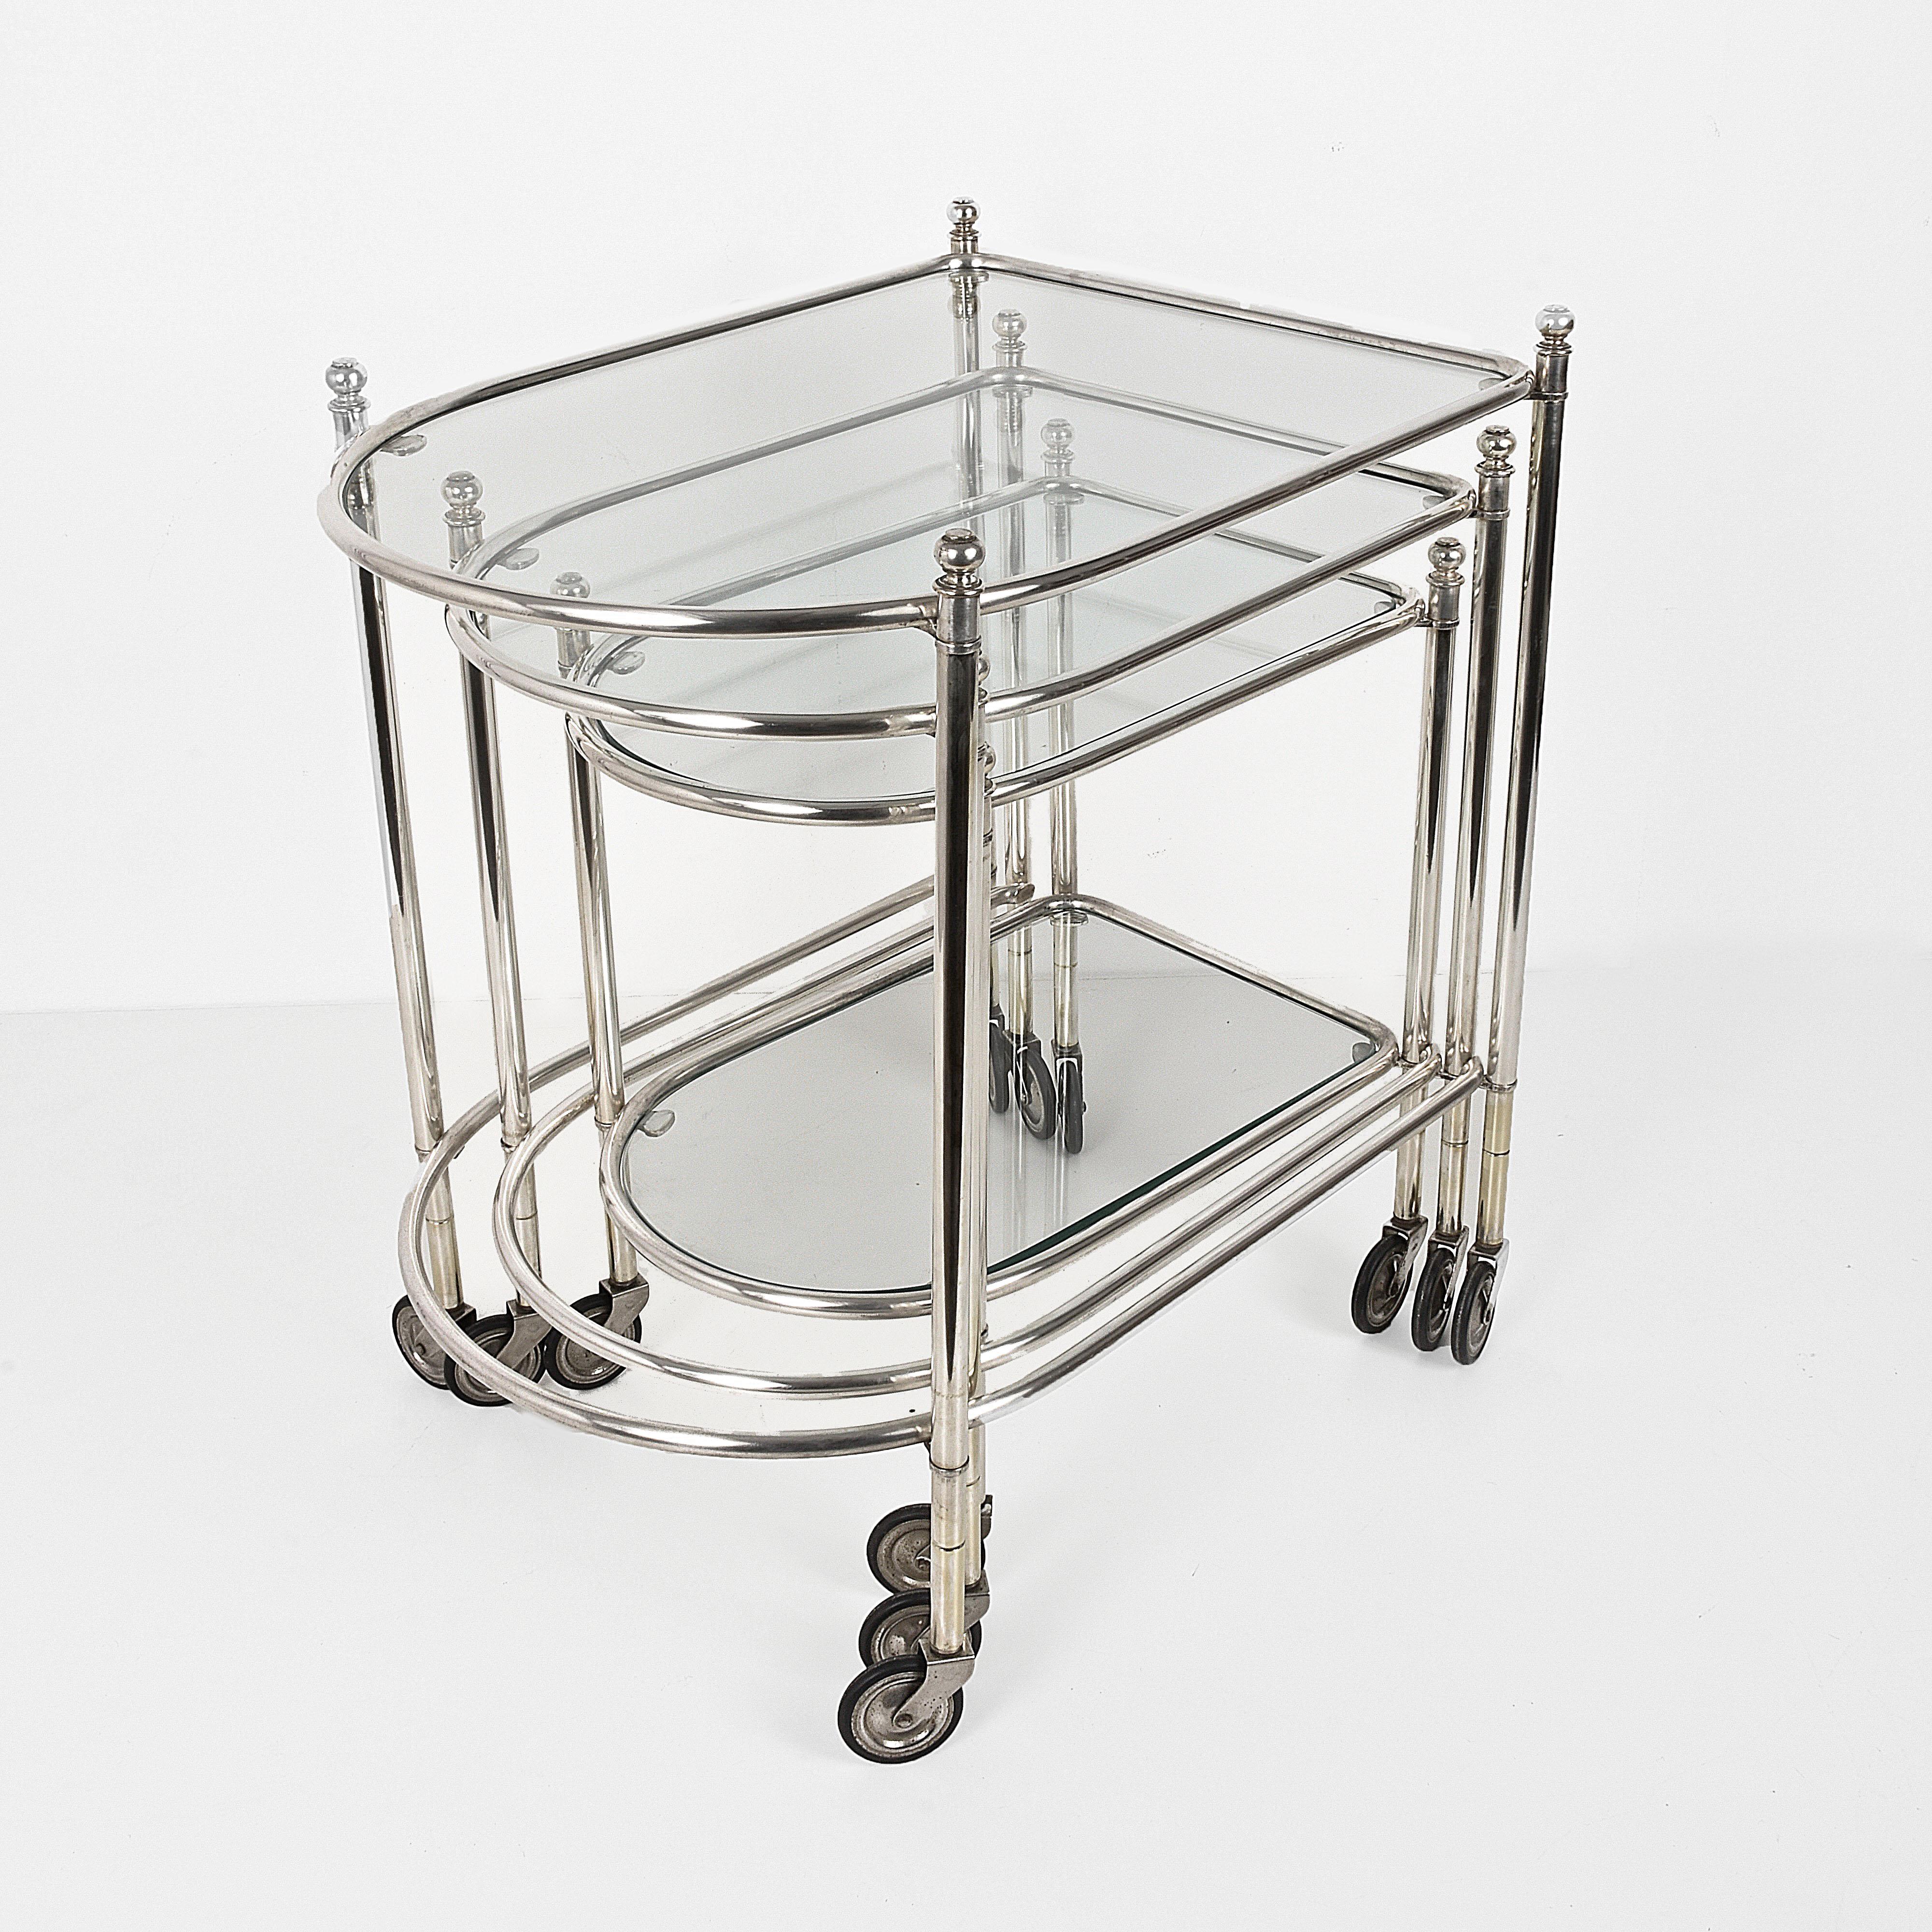 Nesting tables in silvered brass from the 1960s.
The smallest trolley has two glass shelves, the largest have only one glass.
Beautiful state of conservation.
The largest size: 55 x 38 and a height of 58 cm.